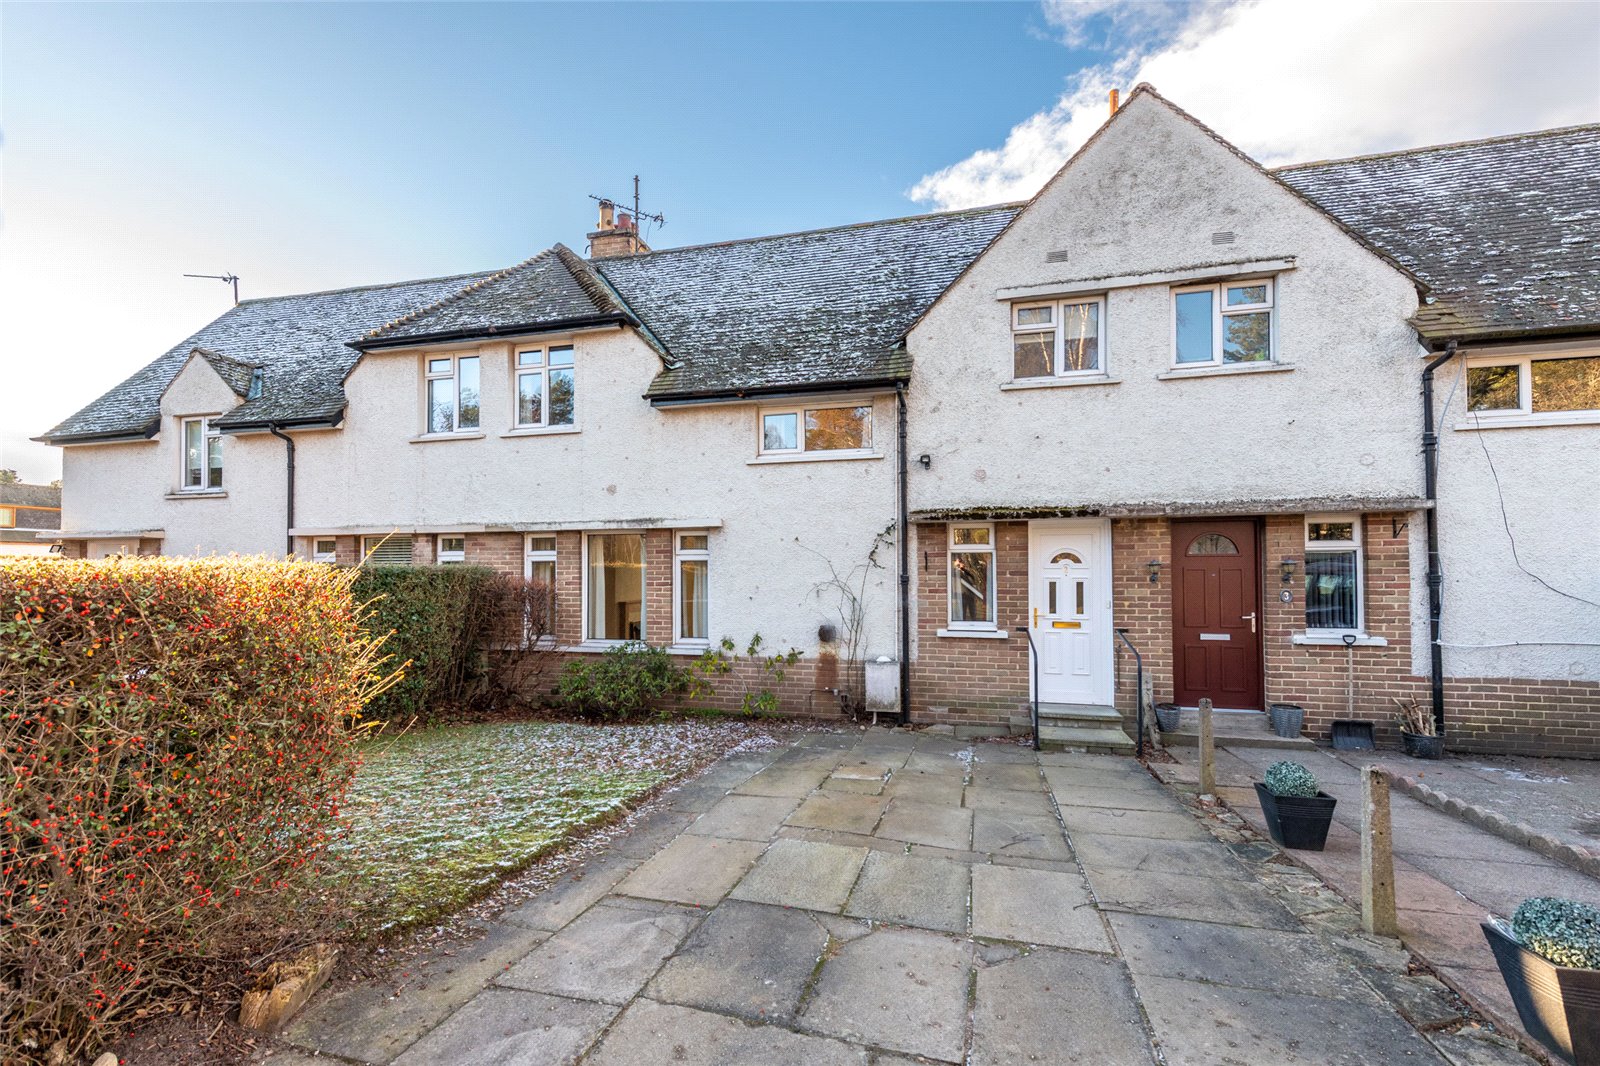 Our latest properties for sale or to let (24th Jan 2023)